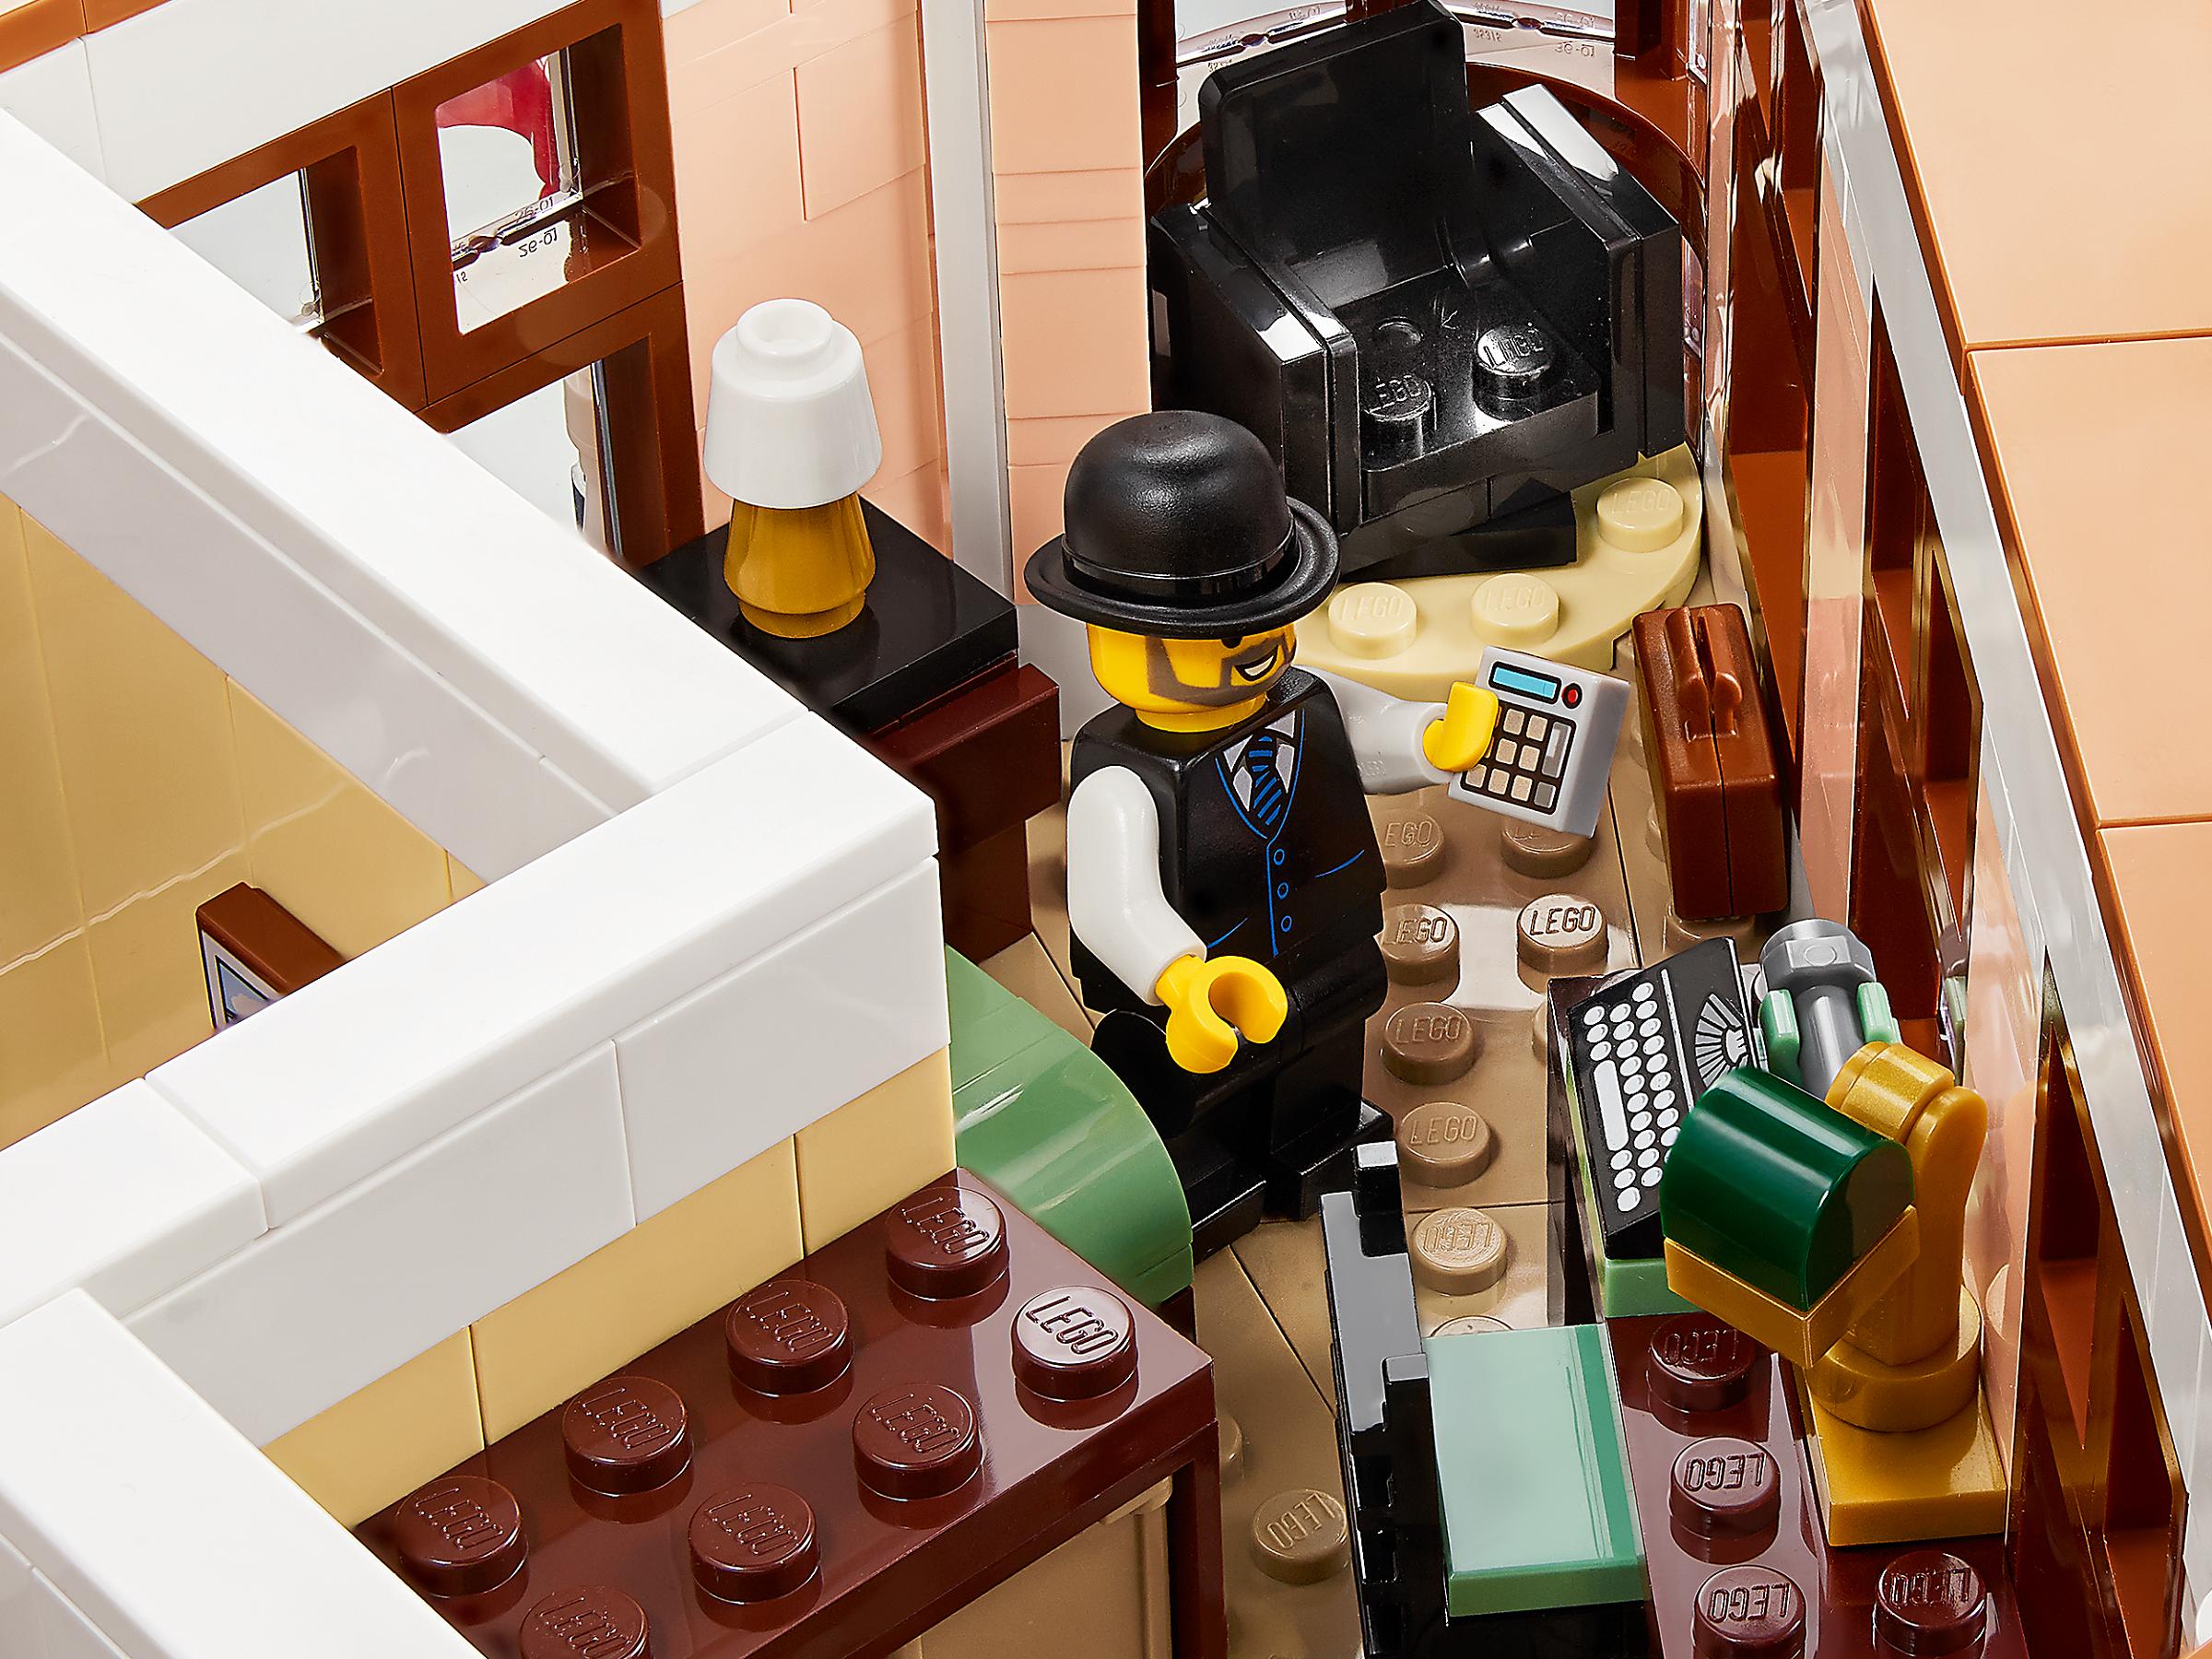 Boutique Hotel 10297 | LEGO® Icons | Buy online at the Official